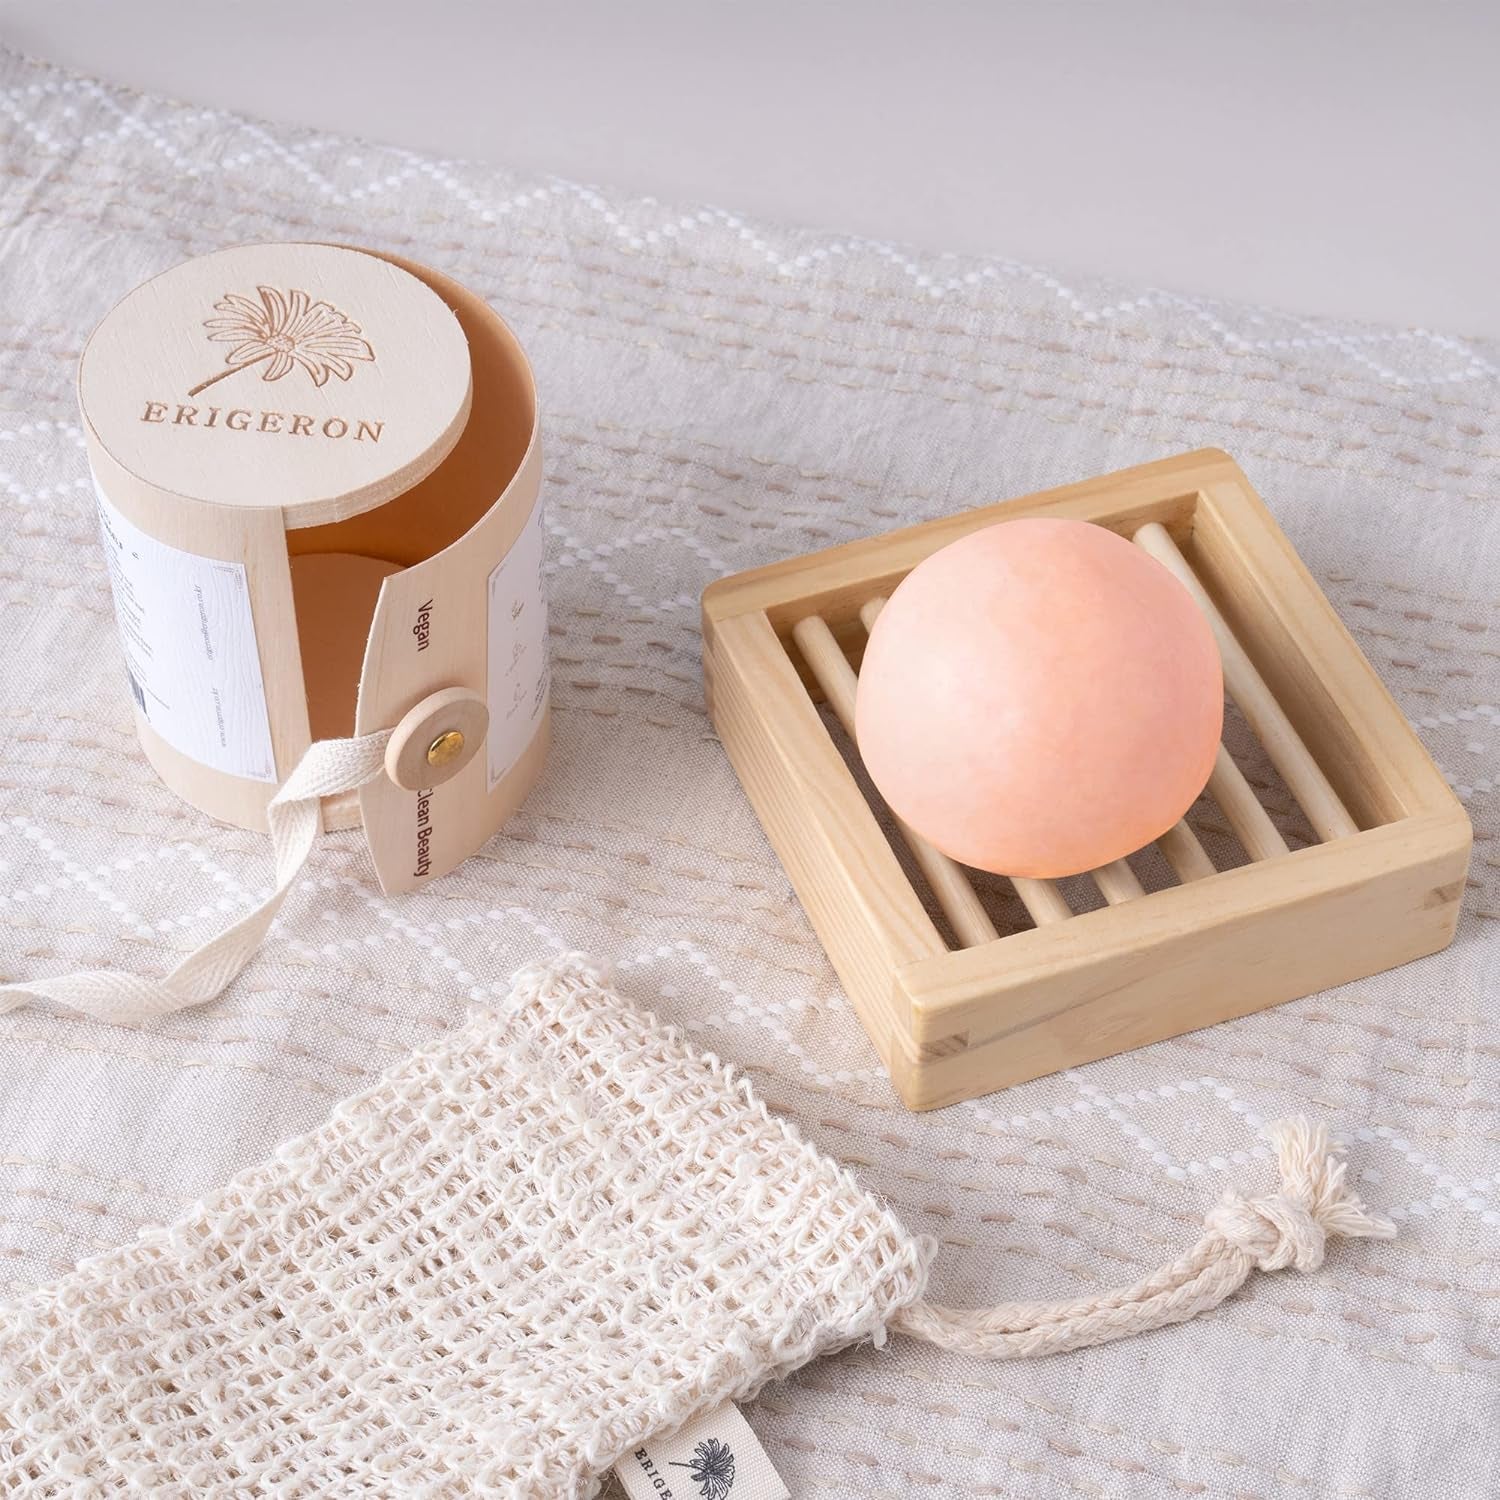 All-In-One Pink Clay Shampoo Bar for All Hair Types & All Skin Types - Cruelty-Free, Vegan, All Natural Ingredients Handmade with Plastic Free, Eco-Friendly & Zero Waste